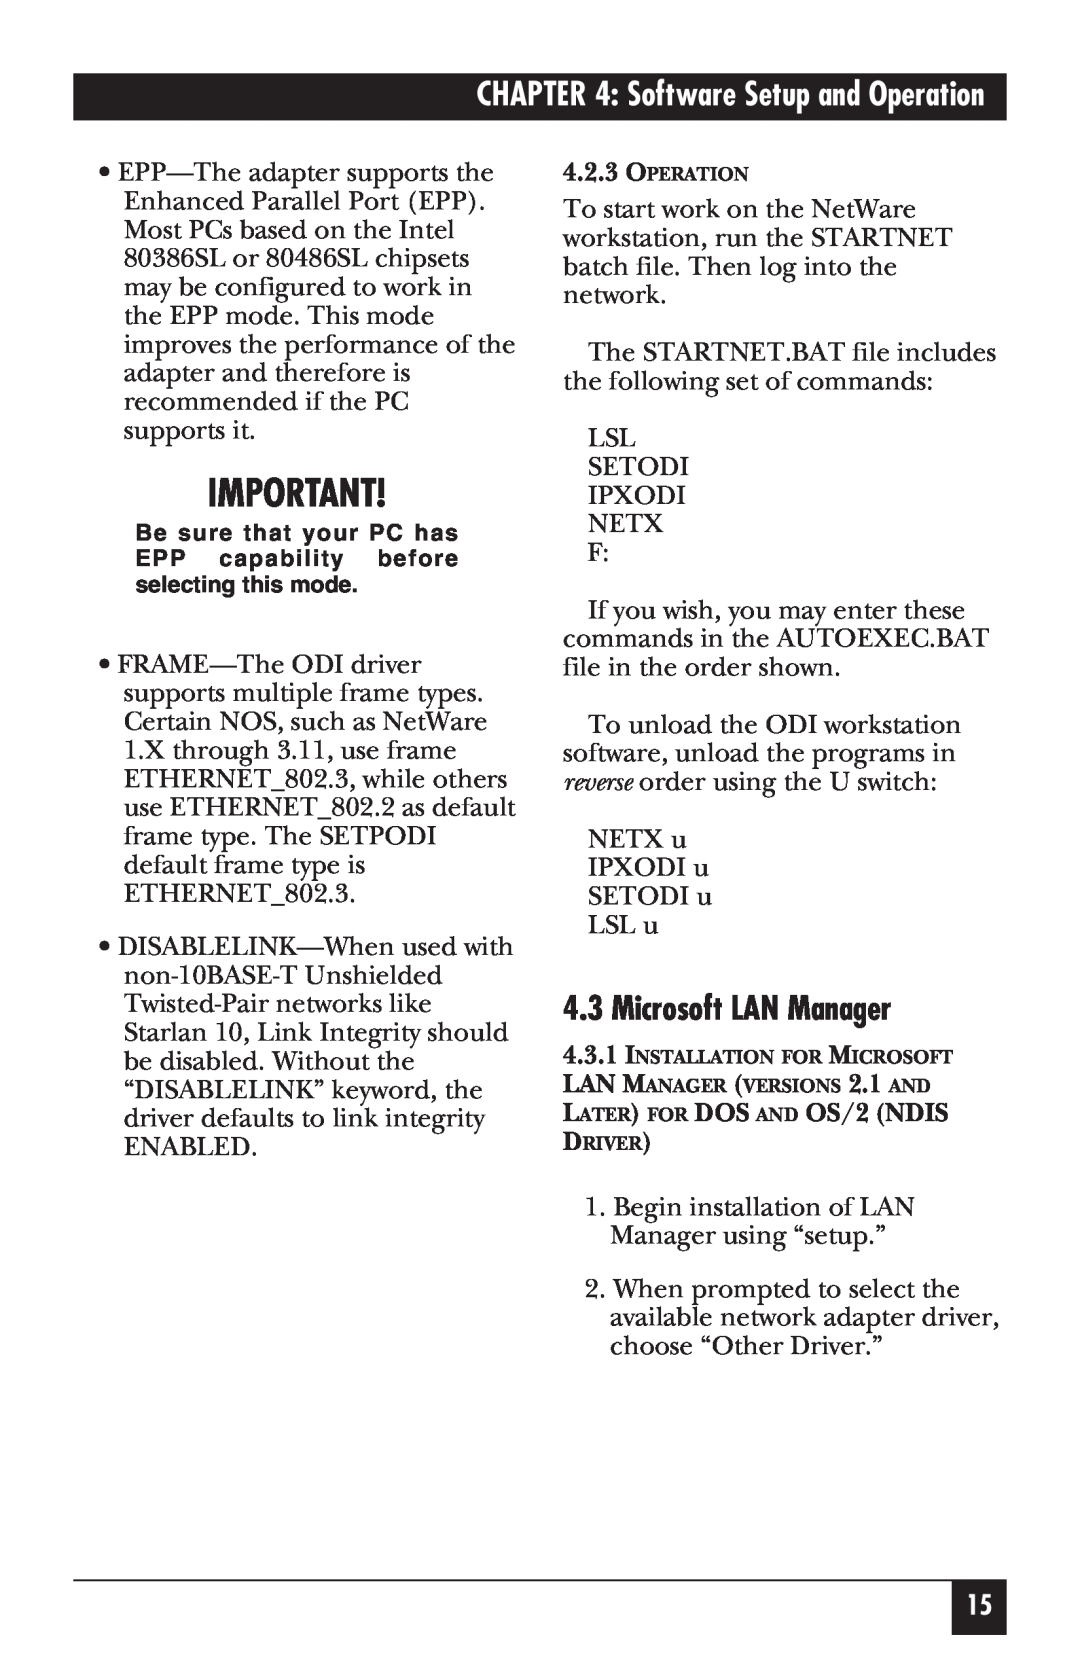 Black Box LE072A, LE172, LE075A-R2, LE076A Microsoft LAN Manager, LATER FOR DOS AND OS/2 NDIS, Software Setup and Operation 